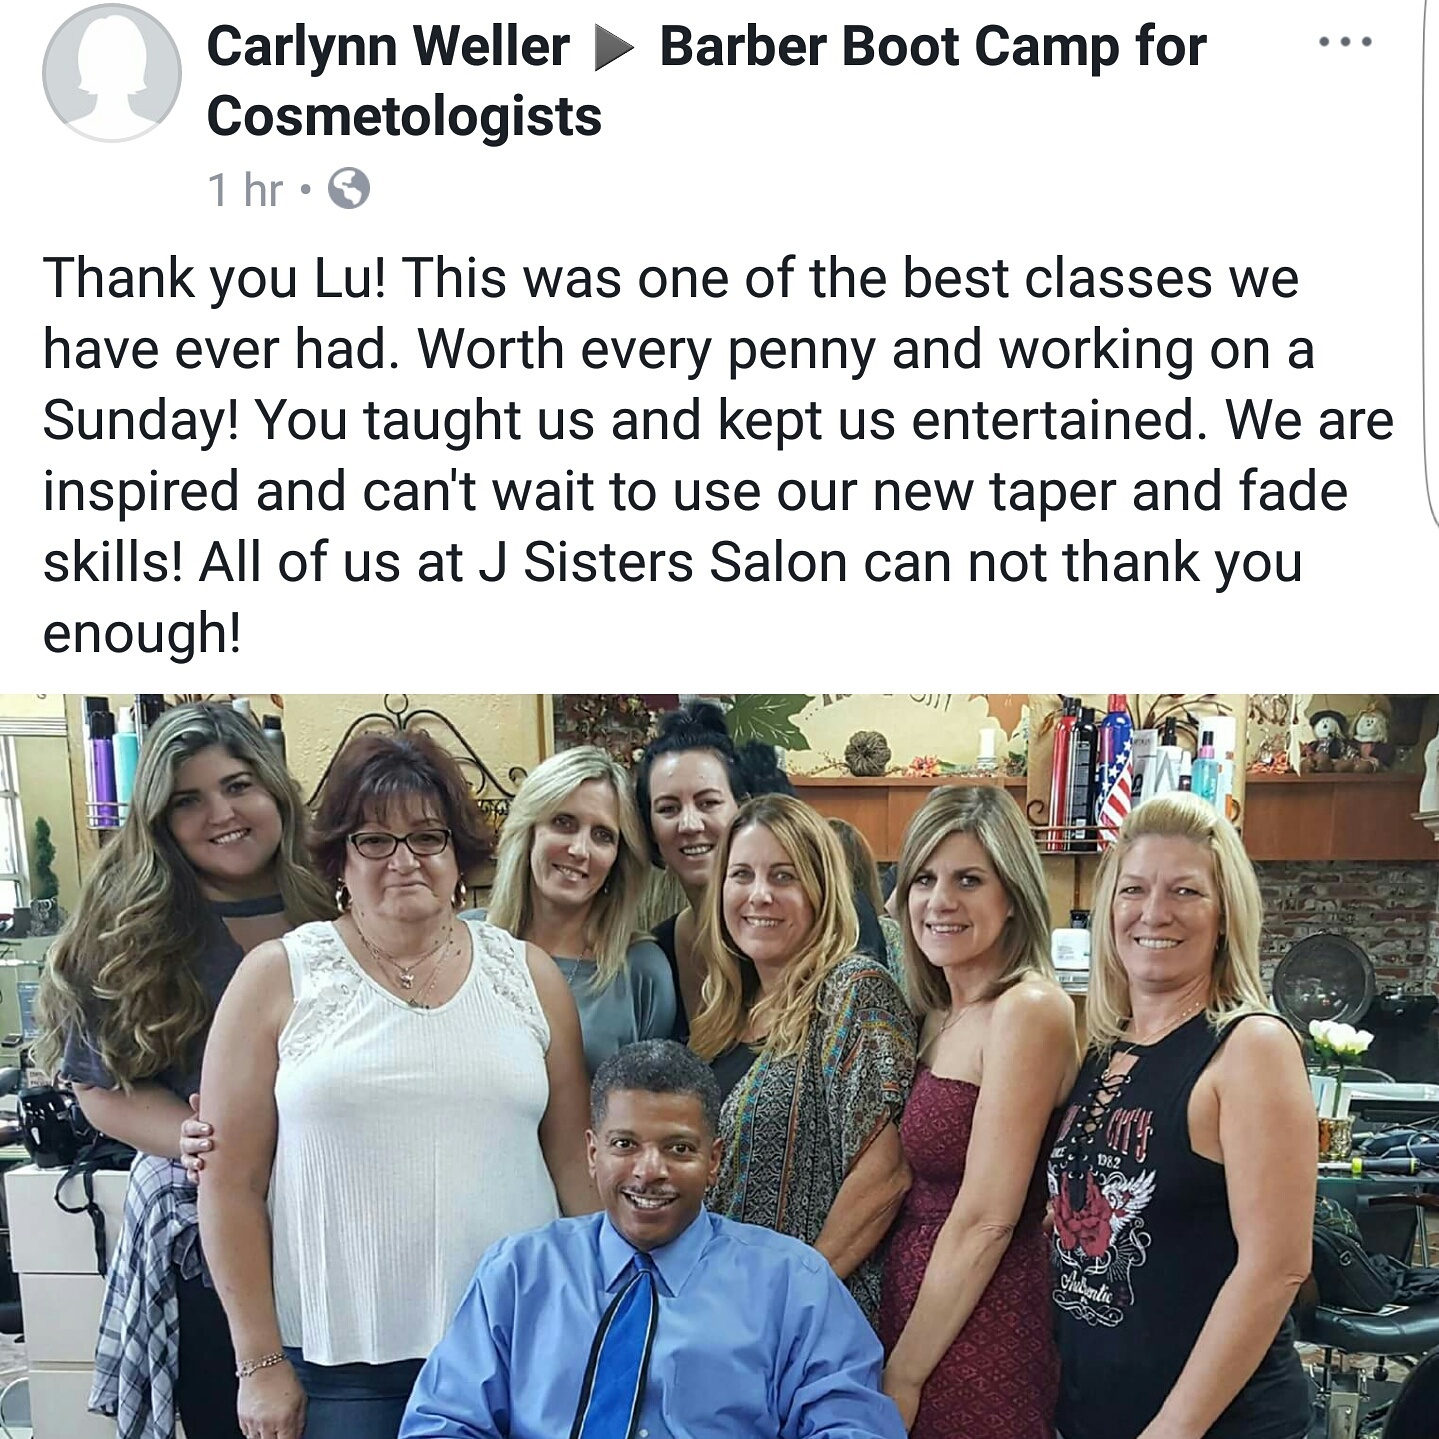 Barber Boot Camp for Cosmetologists